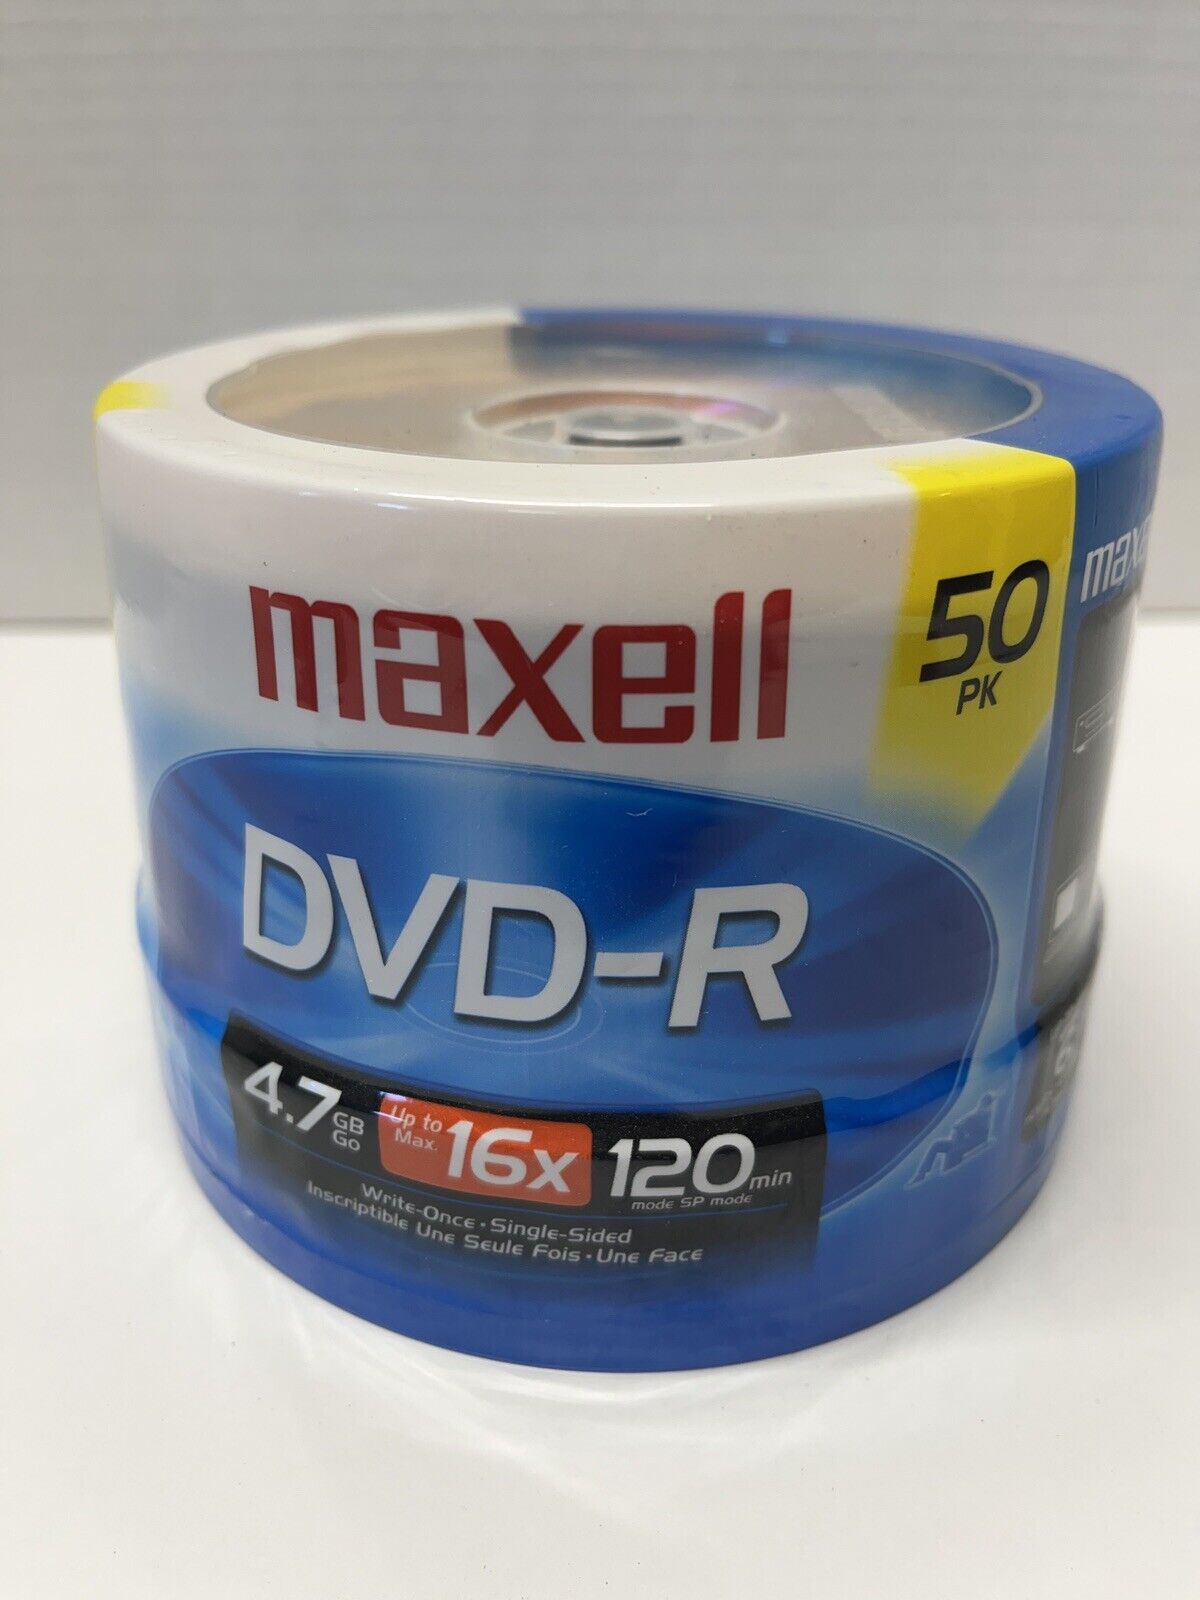 NEW Maxell DVD-R 50 Pack 16x 4.7gb 120 Min Factory Sealed Gold